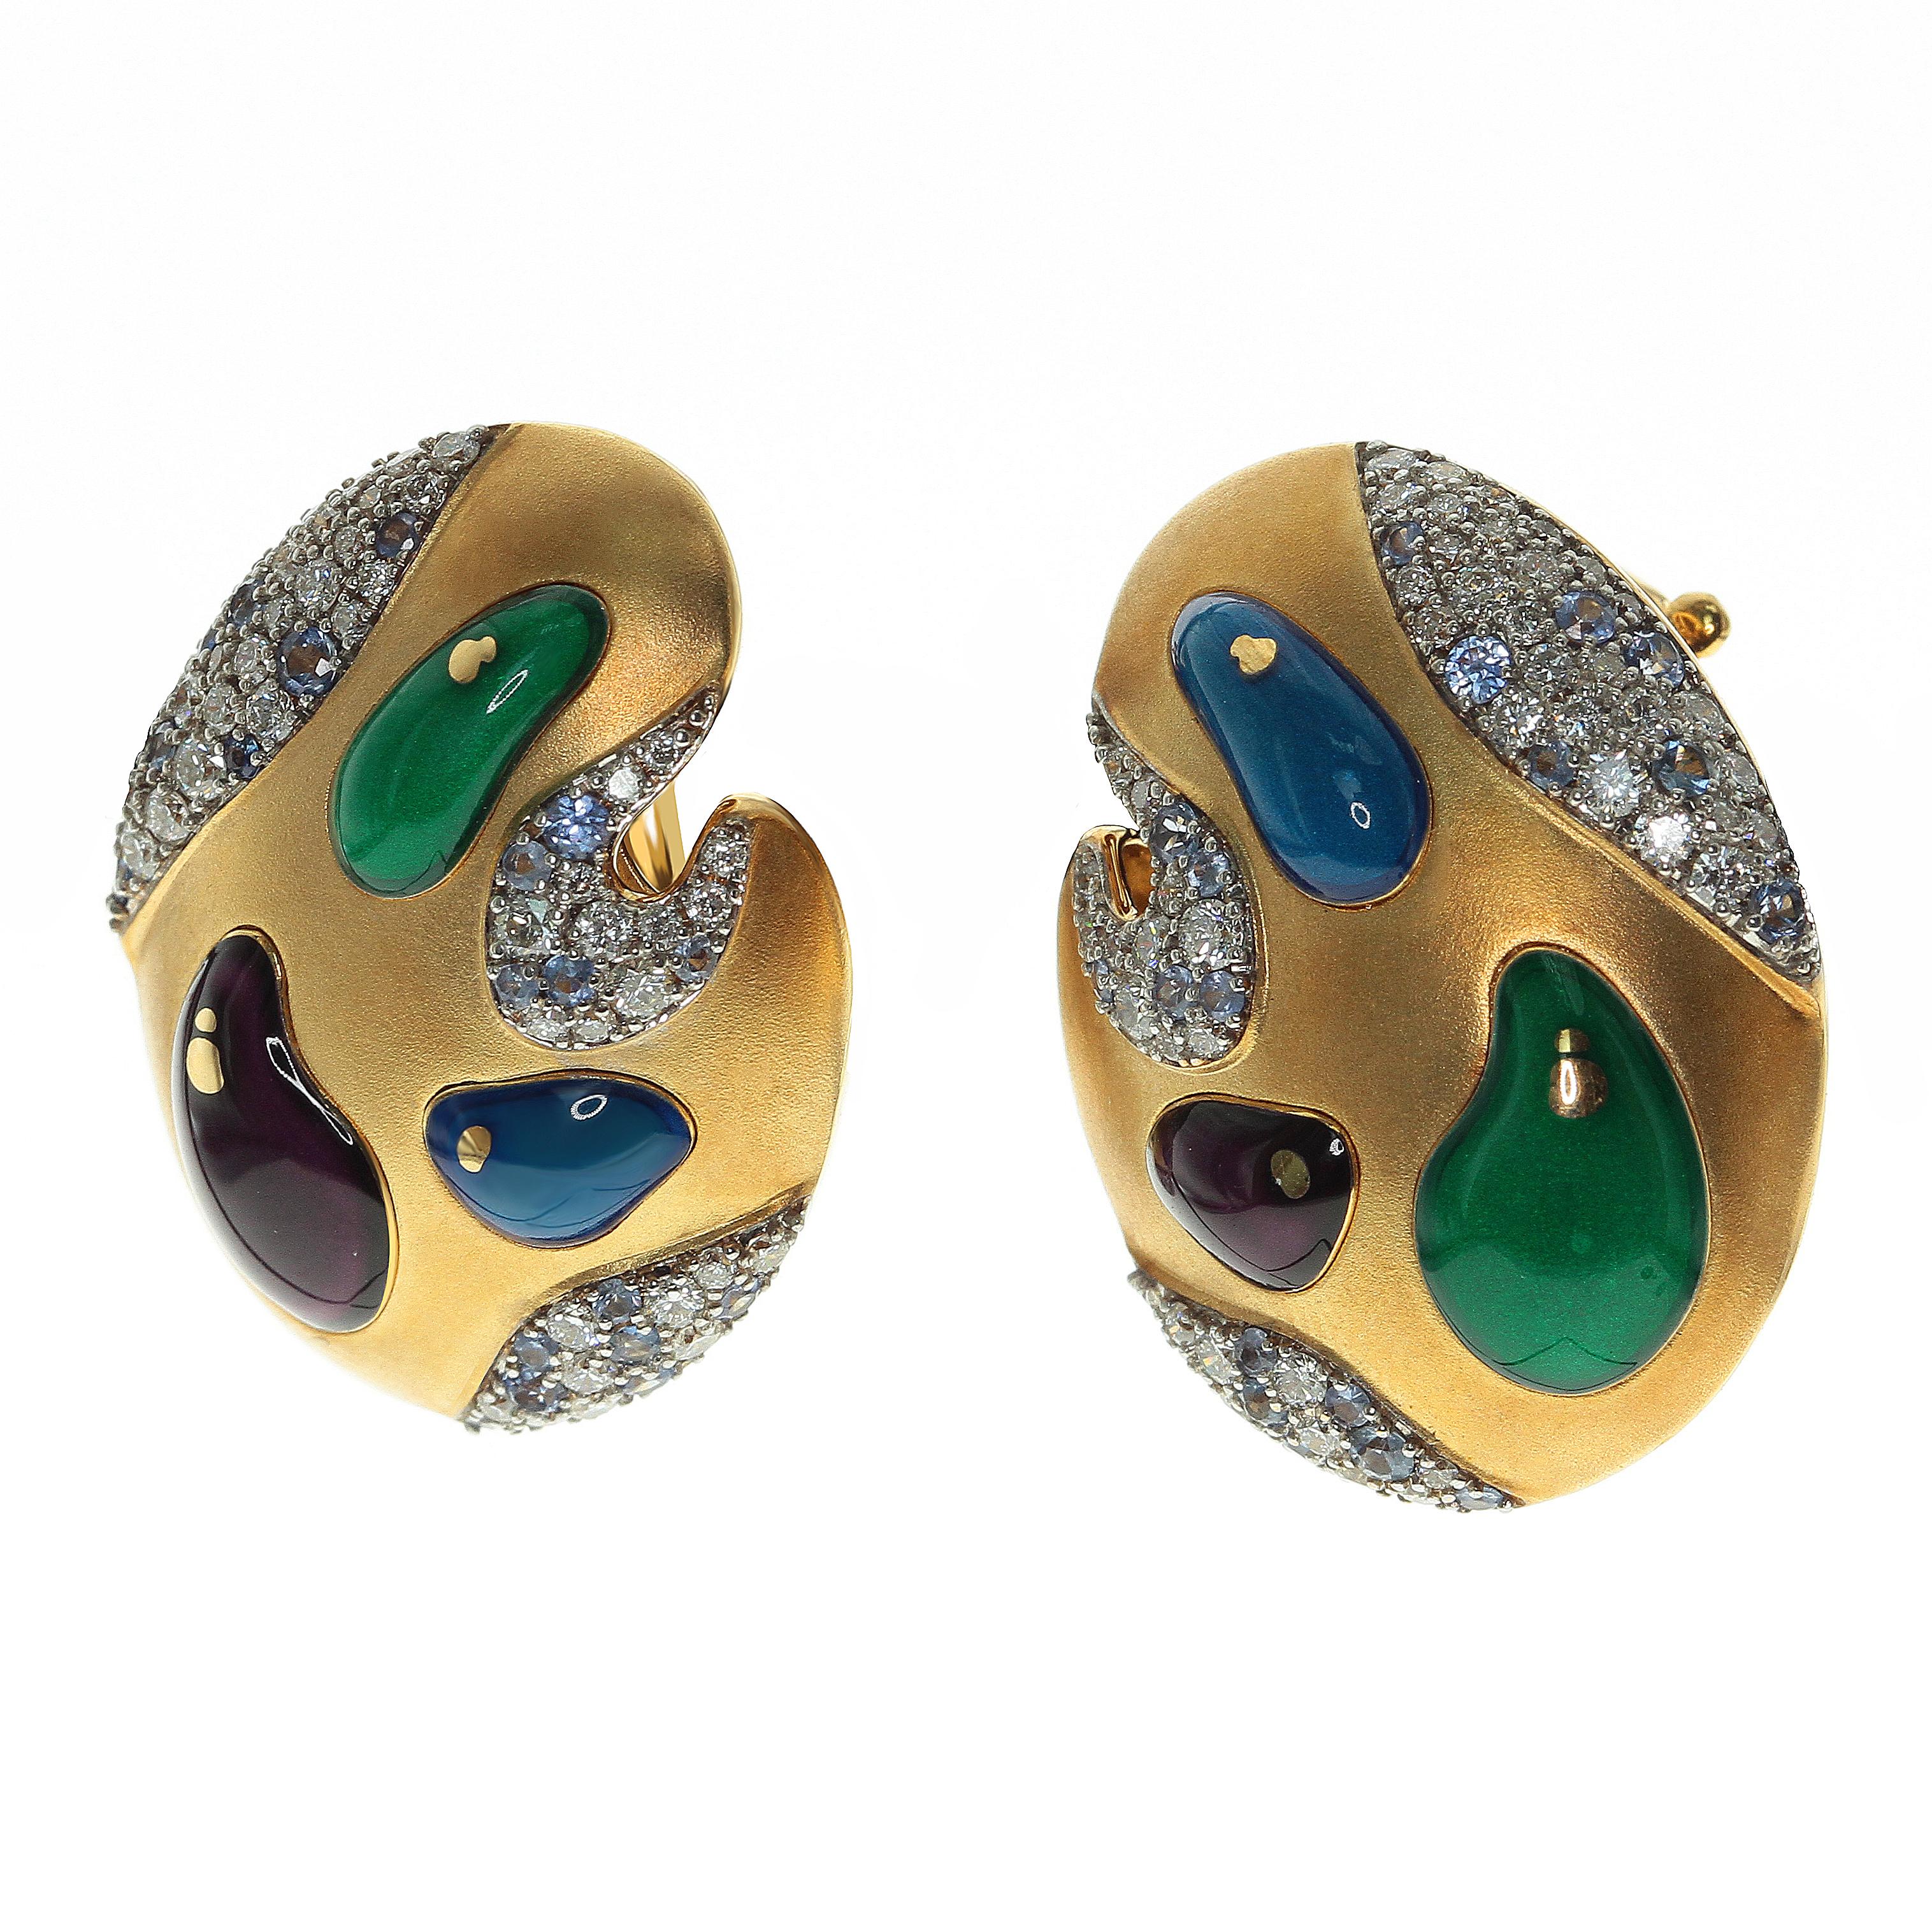 Diamond Sapphire Enamel 18 Karat Yellow Gold Palette Earrings
High detailed back part. Best present ever for some Artistic Person. 
Accompanied with the ring LU116414785053 and brooch LU116414785033

Size 17.3x22.8x6.1 mm
Weight 12.45 gm